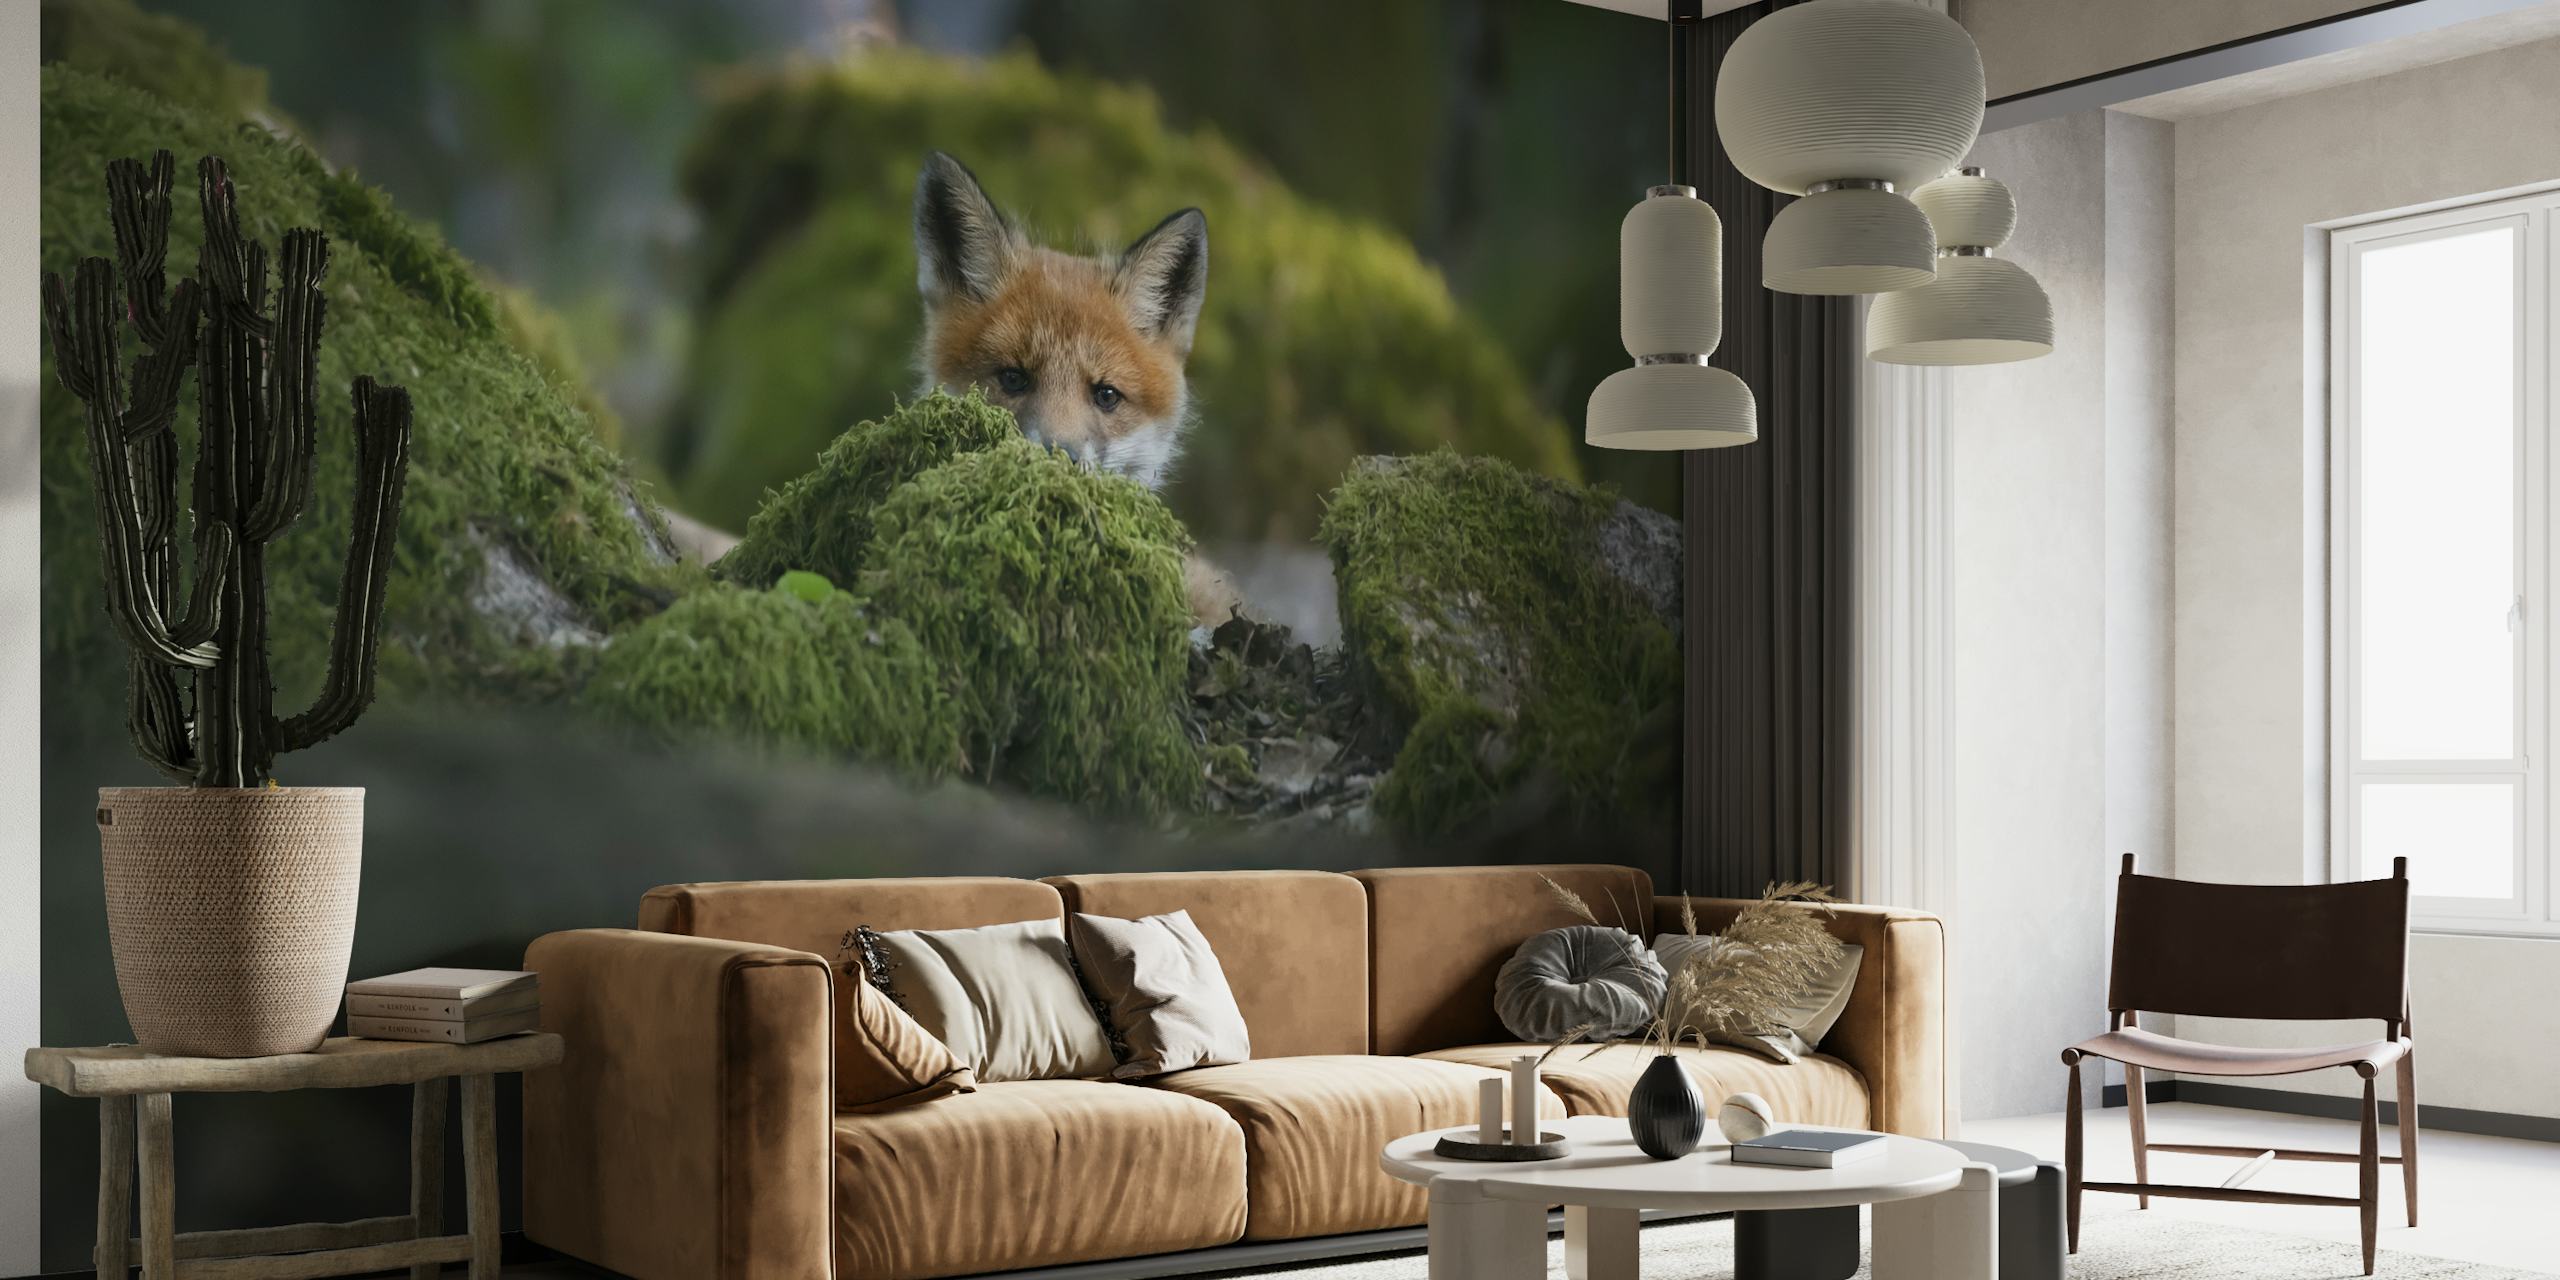 Wall mural of a curious fox peeking out from mossy ground in a forest